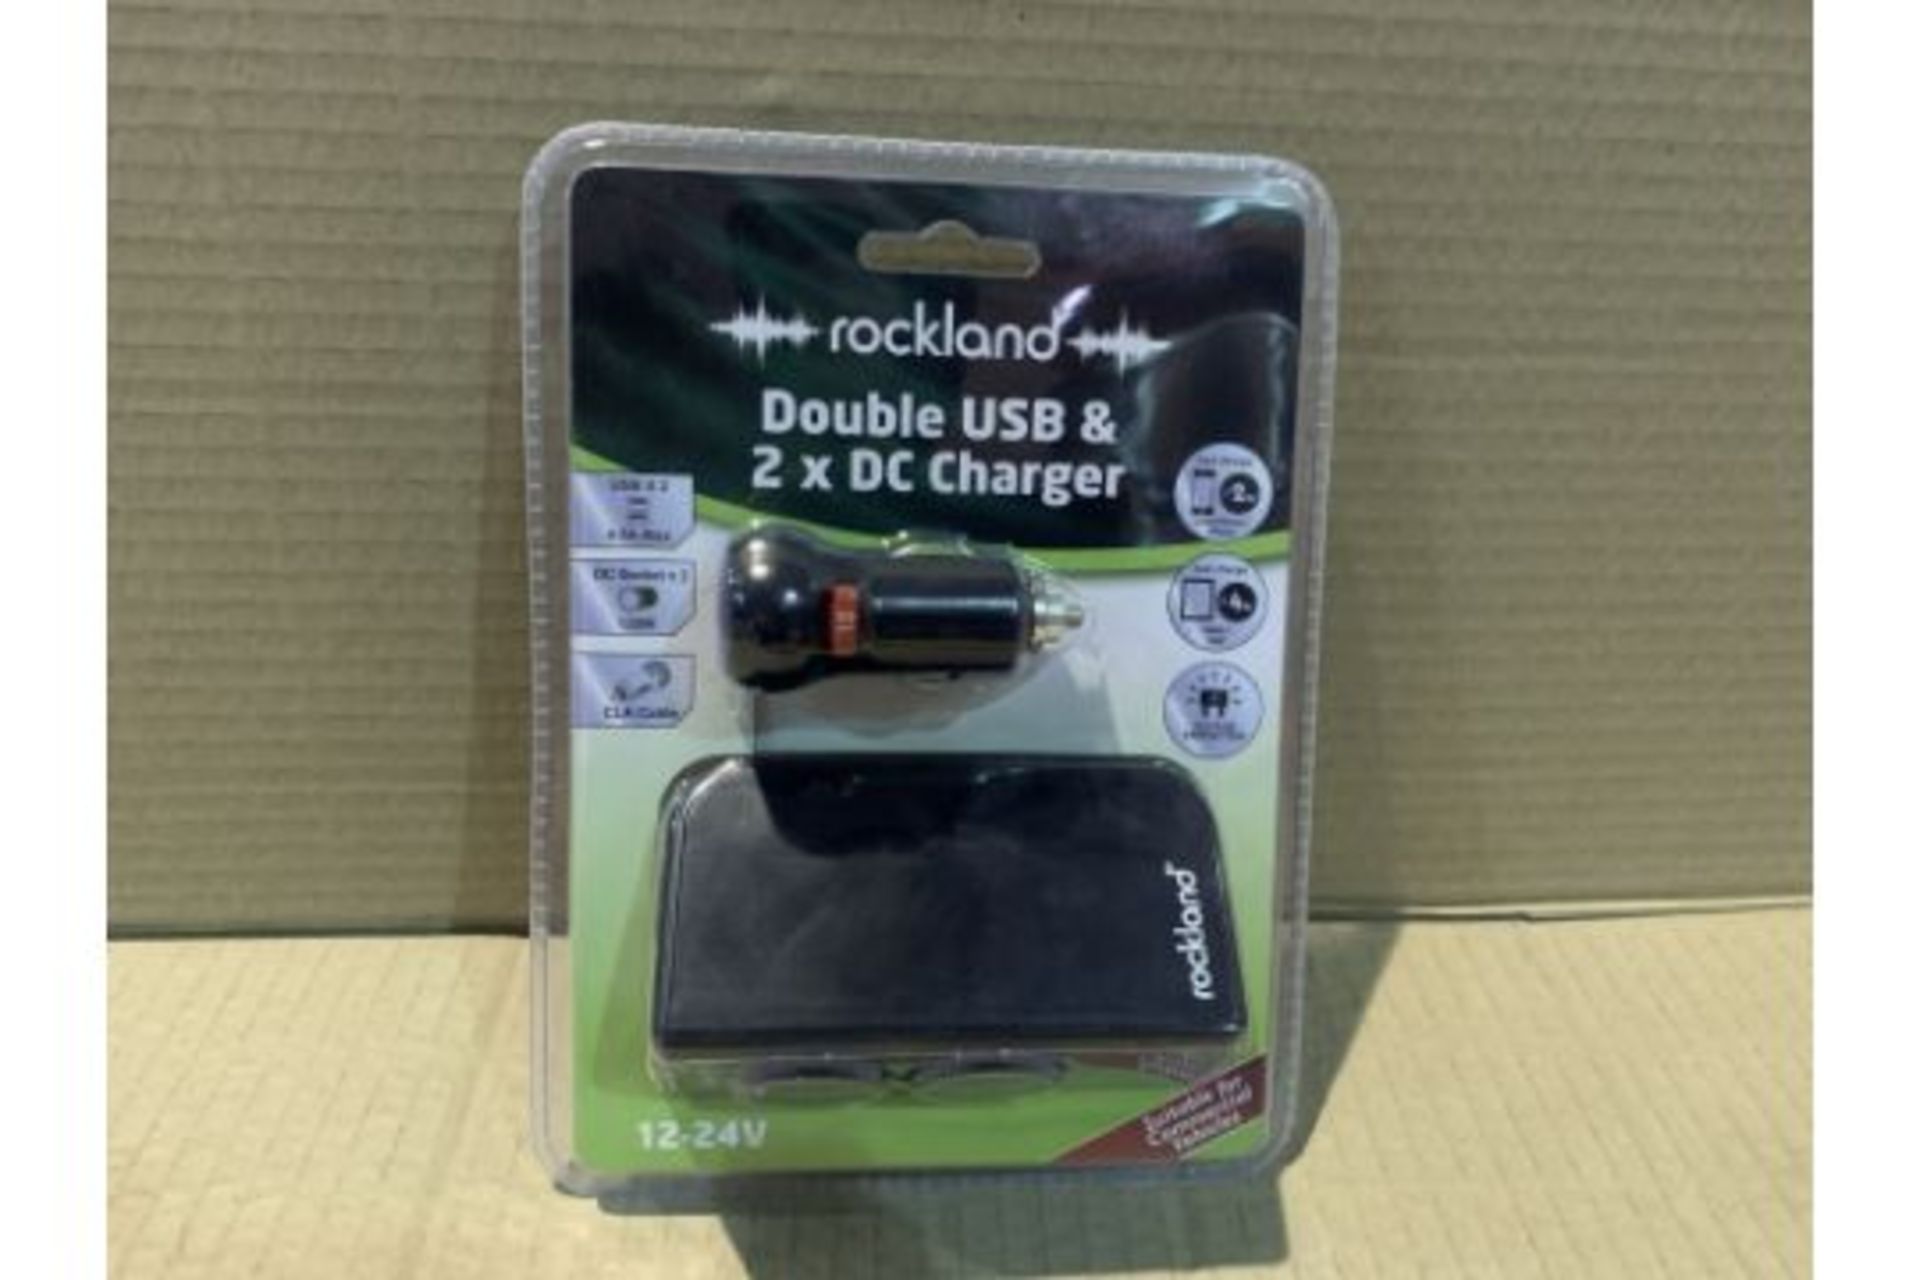 36 X NEW PACKAGED ROCKLAND DOUBLE USB & 2 x DC CHARGER. 12-24V. ALSO SUITABLE FOR COMMERCIAL